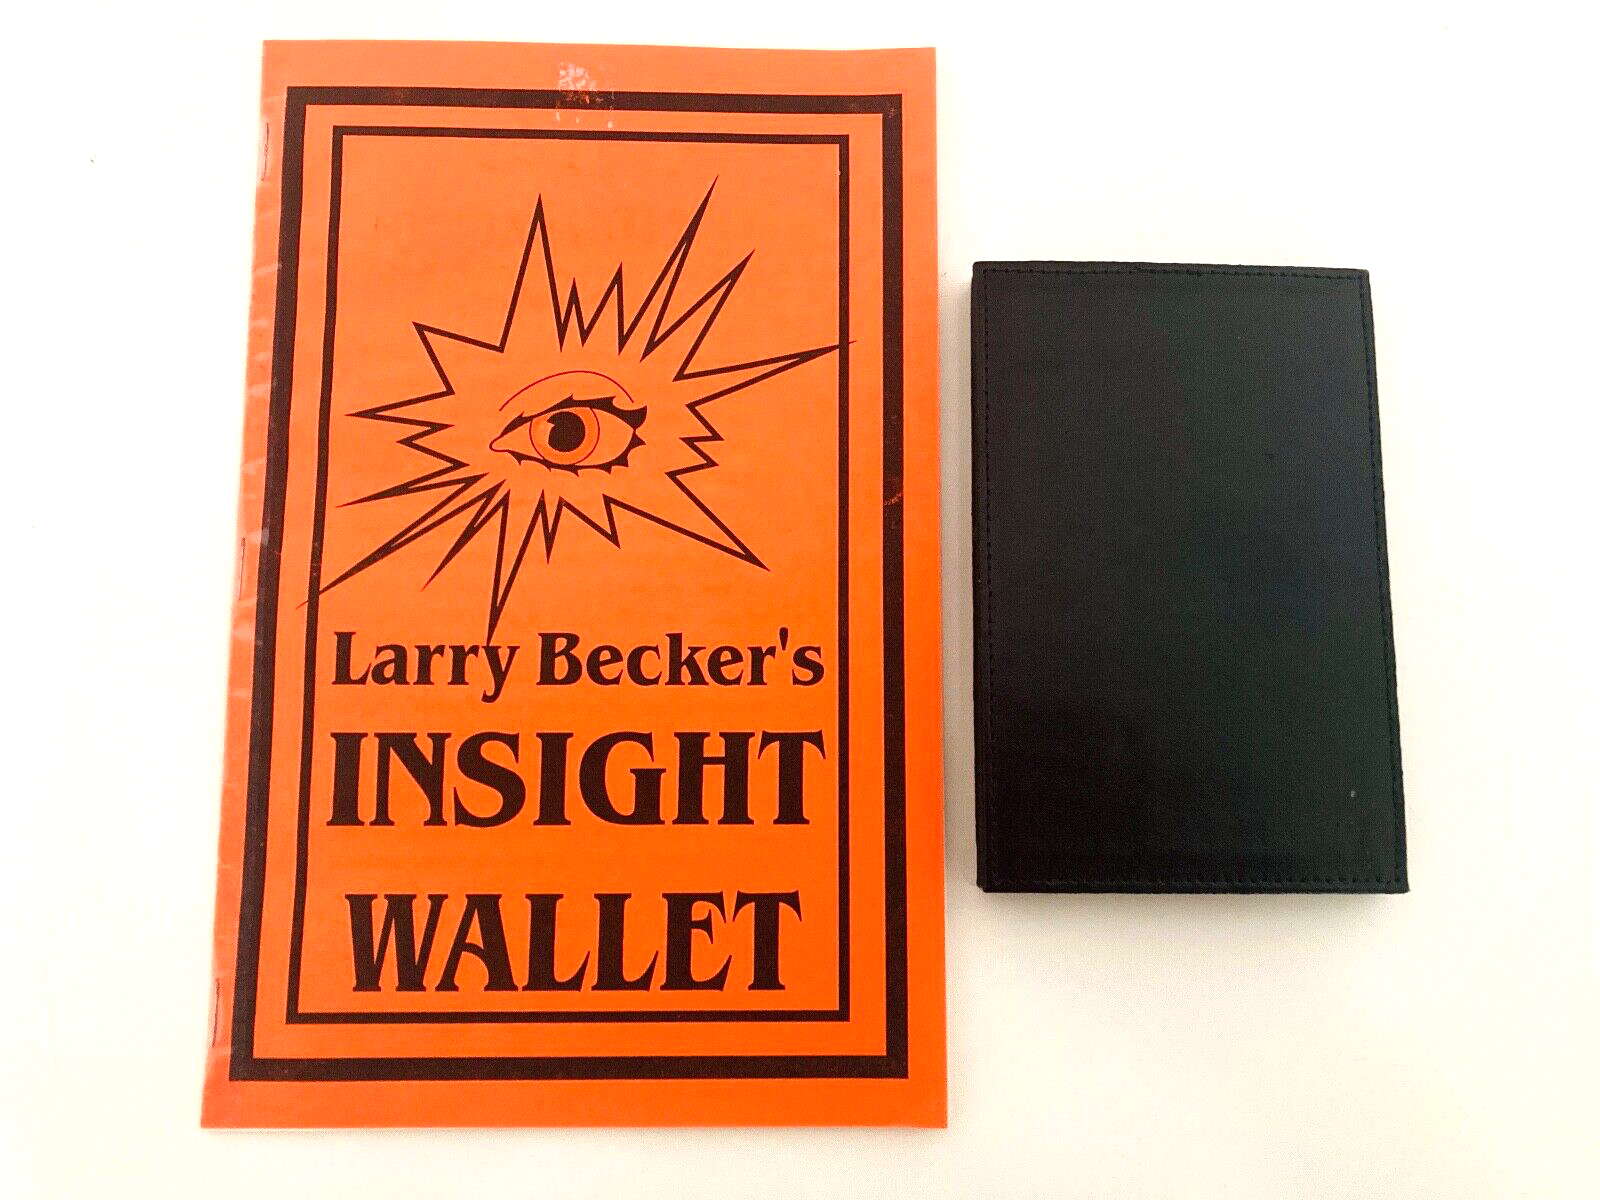 Larry Becker Insight Wallet  and booklet shown closed